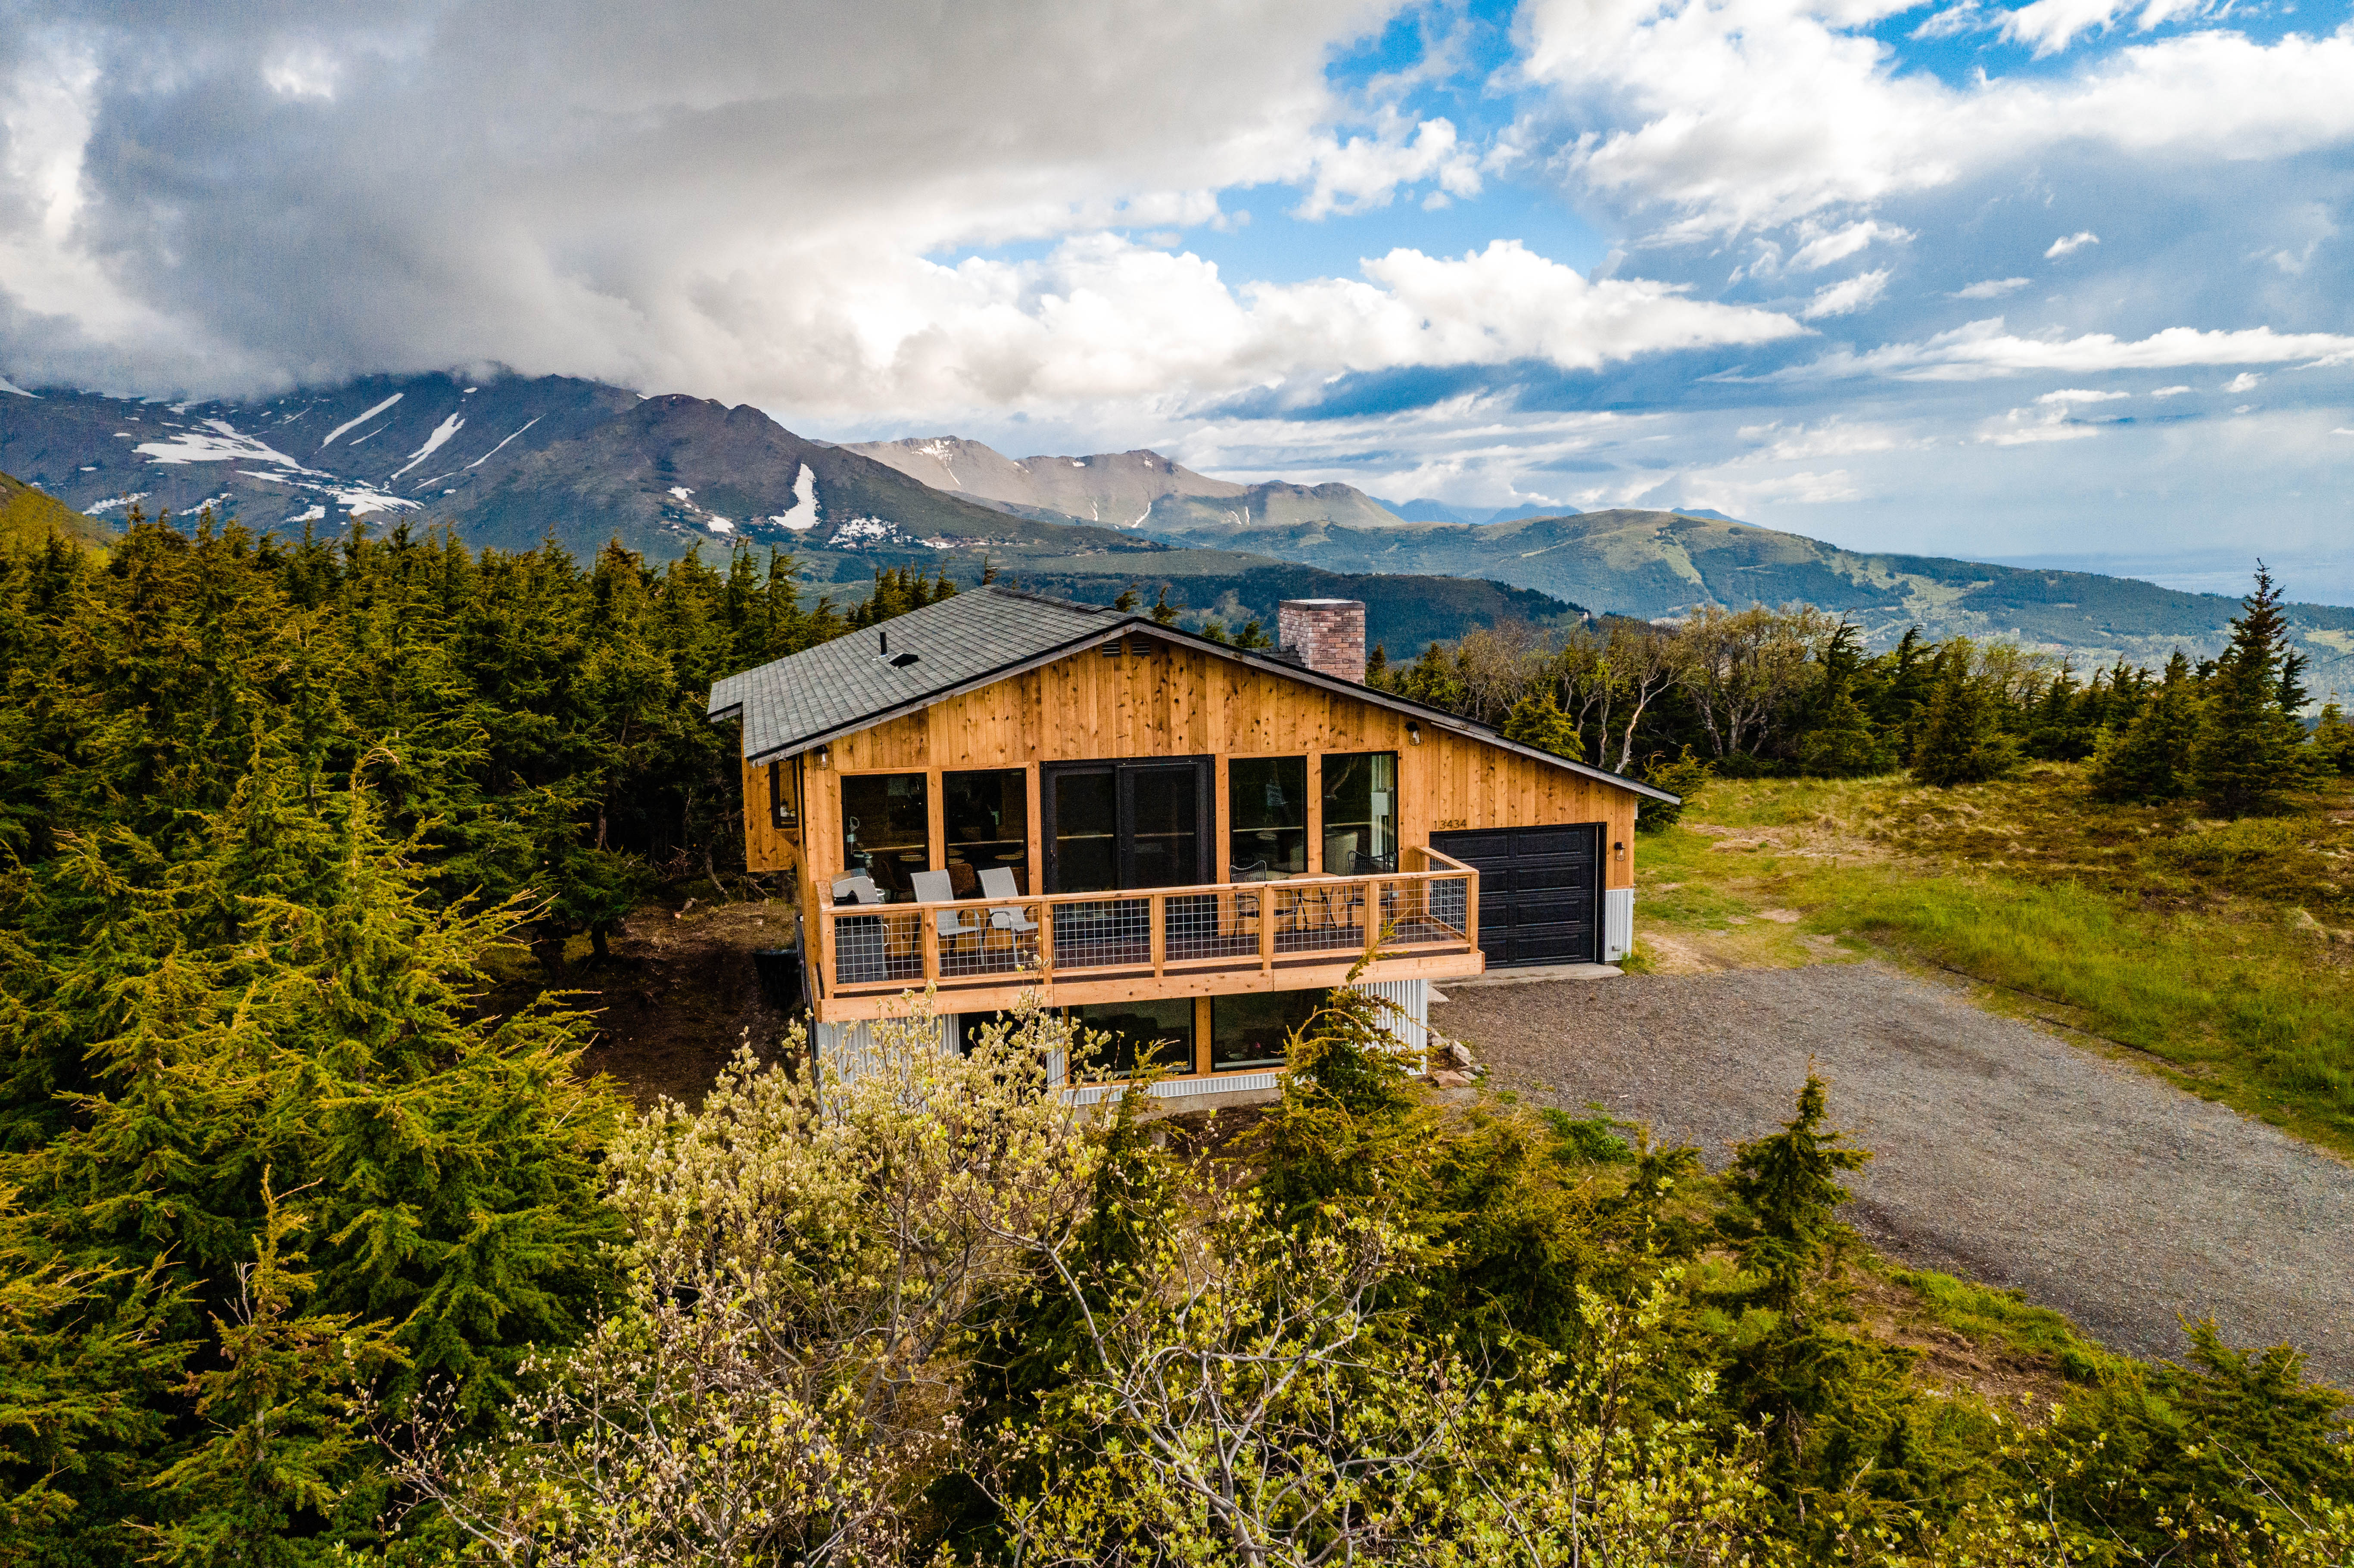 White pine lodge nestled amongst green alpine forests and mountains in the background.